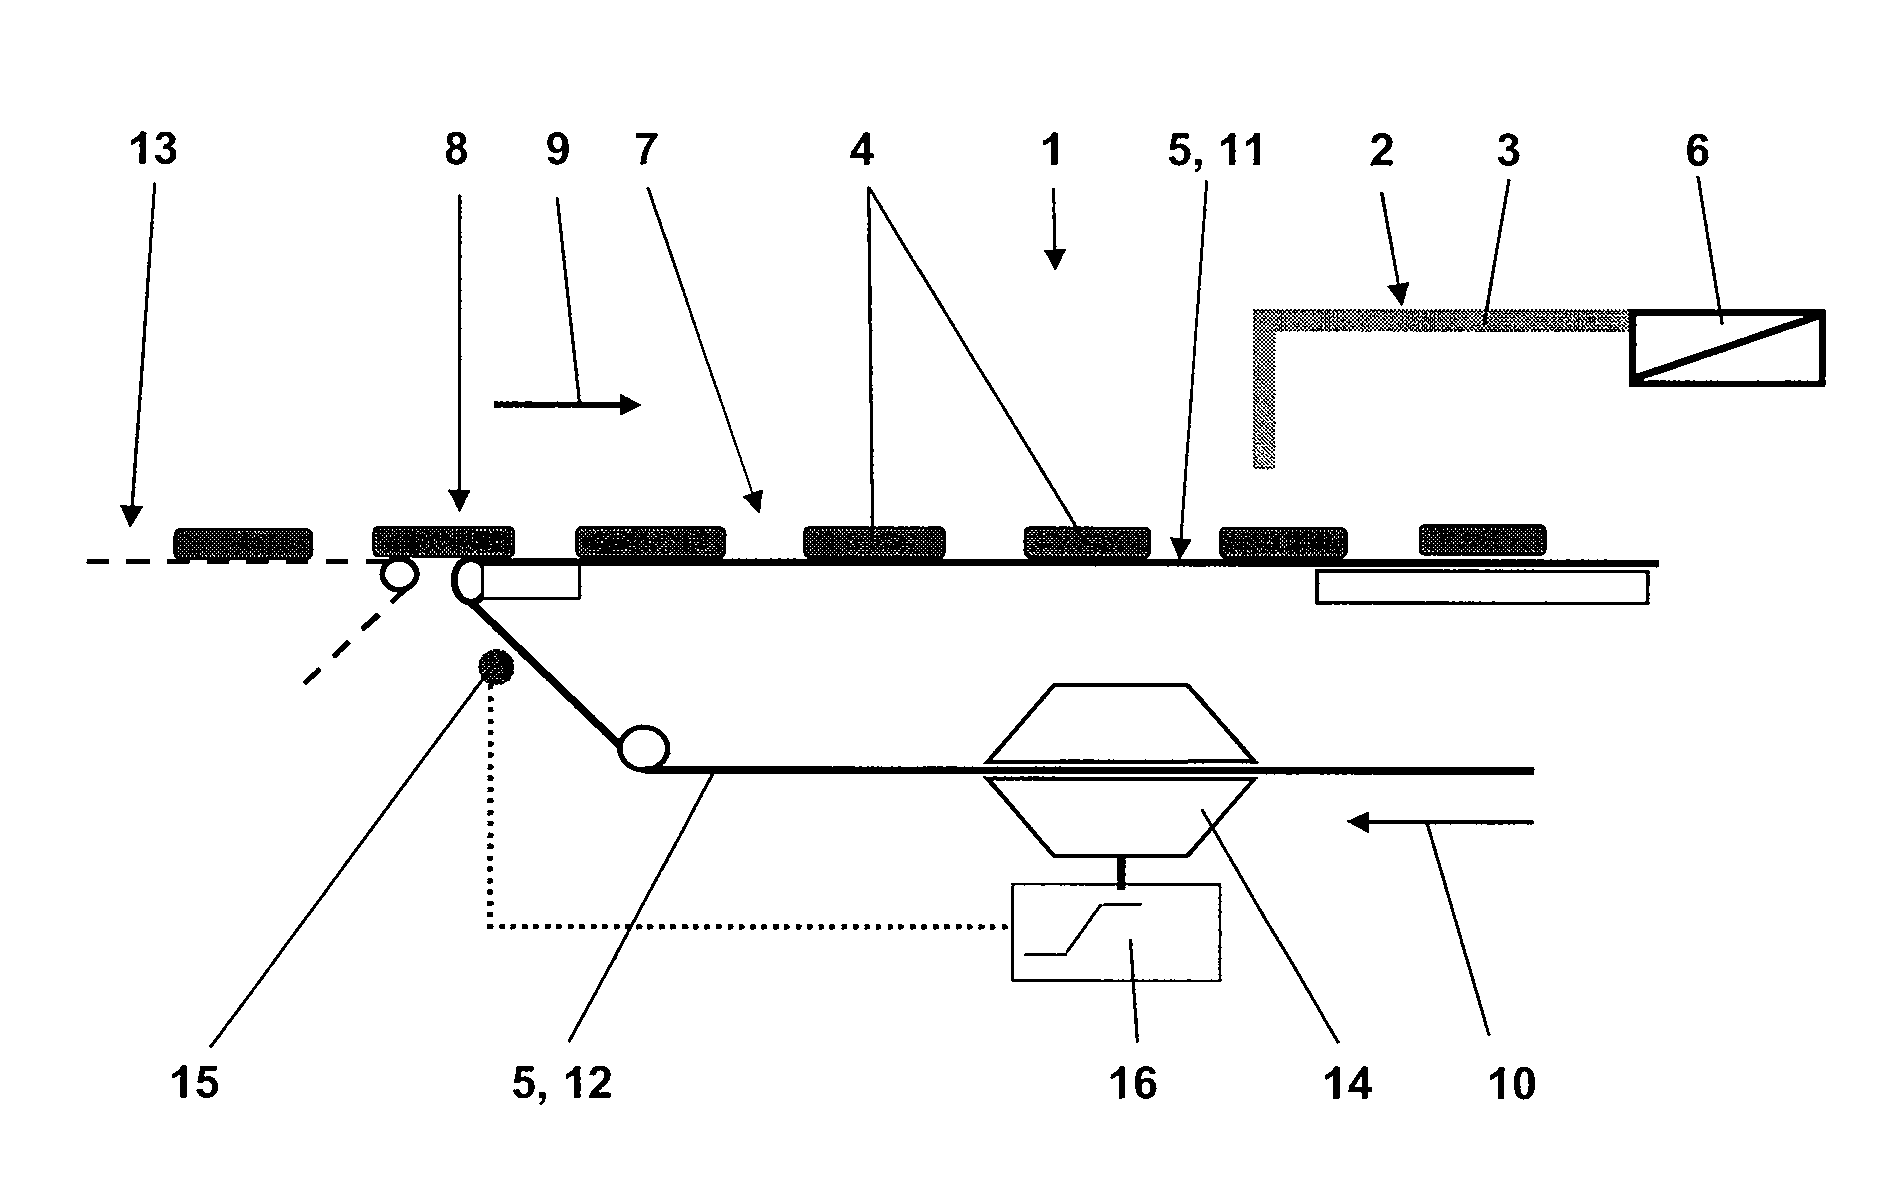 Tempering Channel for Confectioneries and Method of Operating It